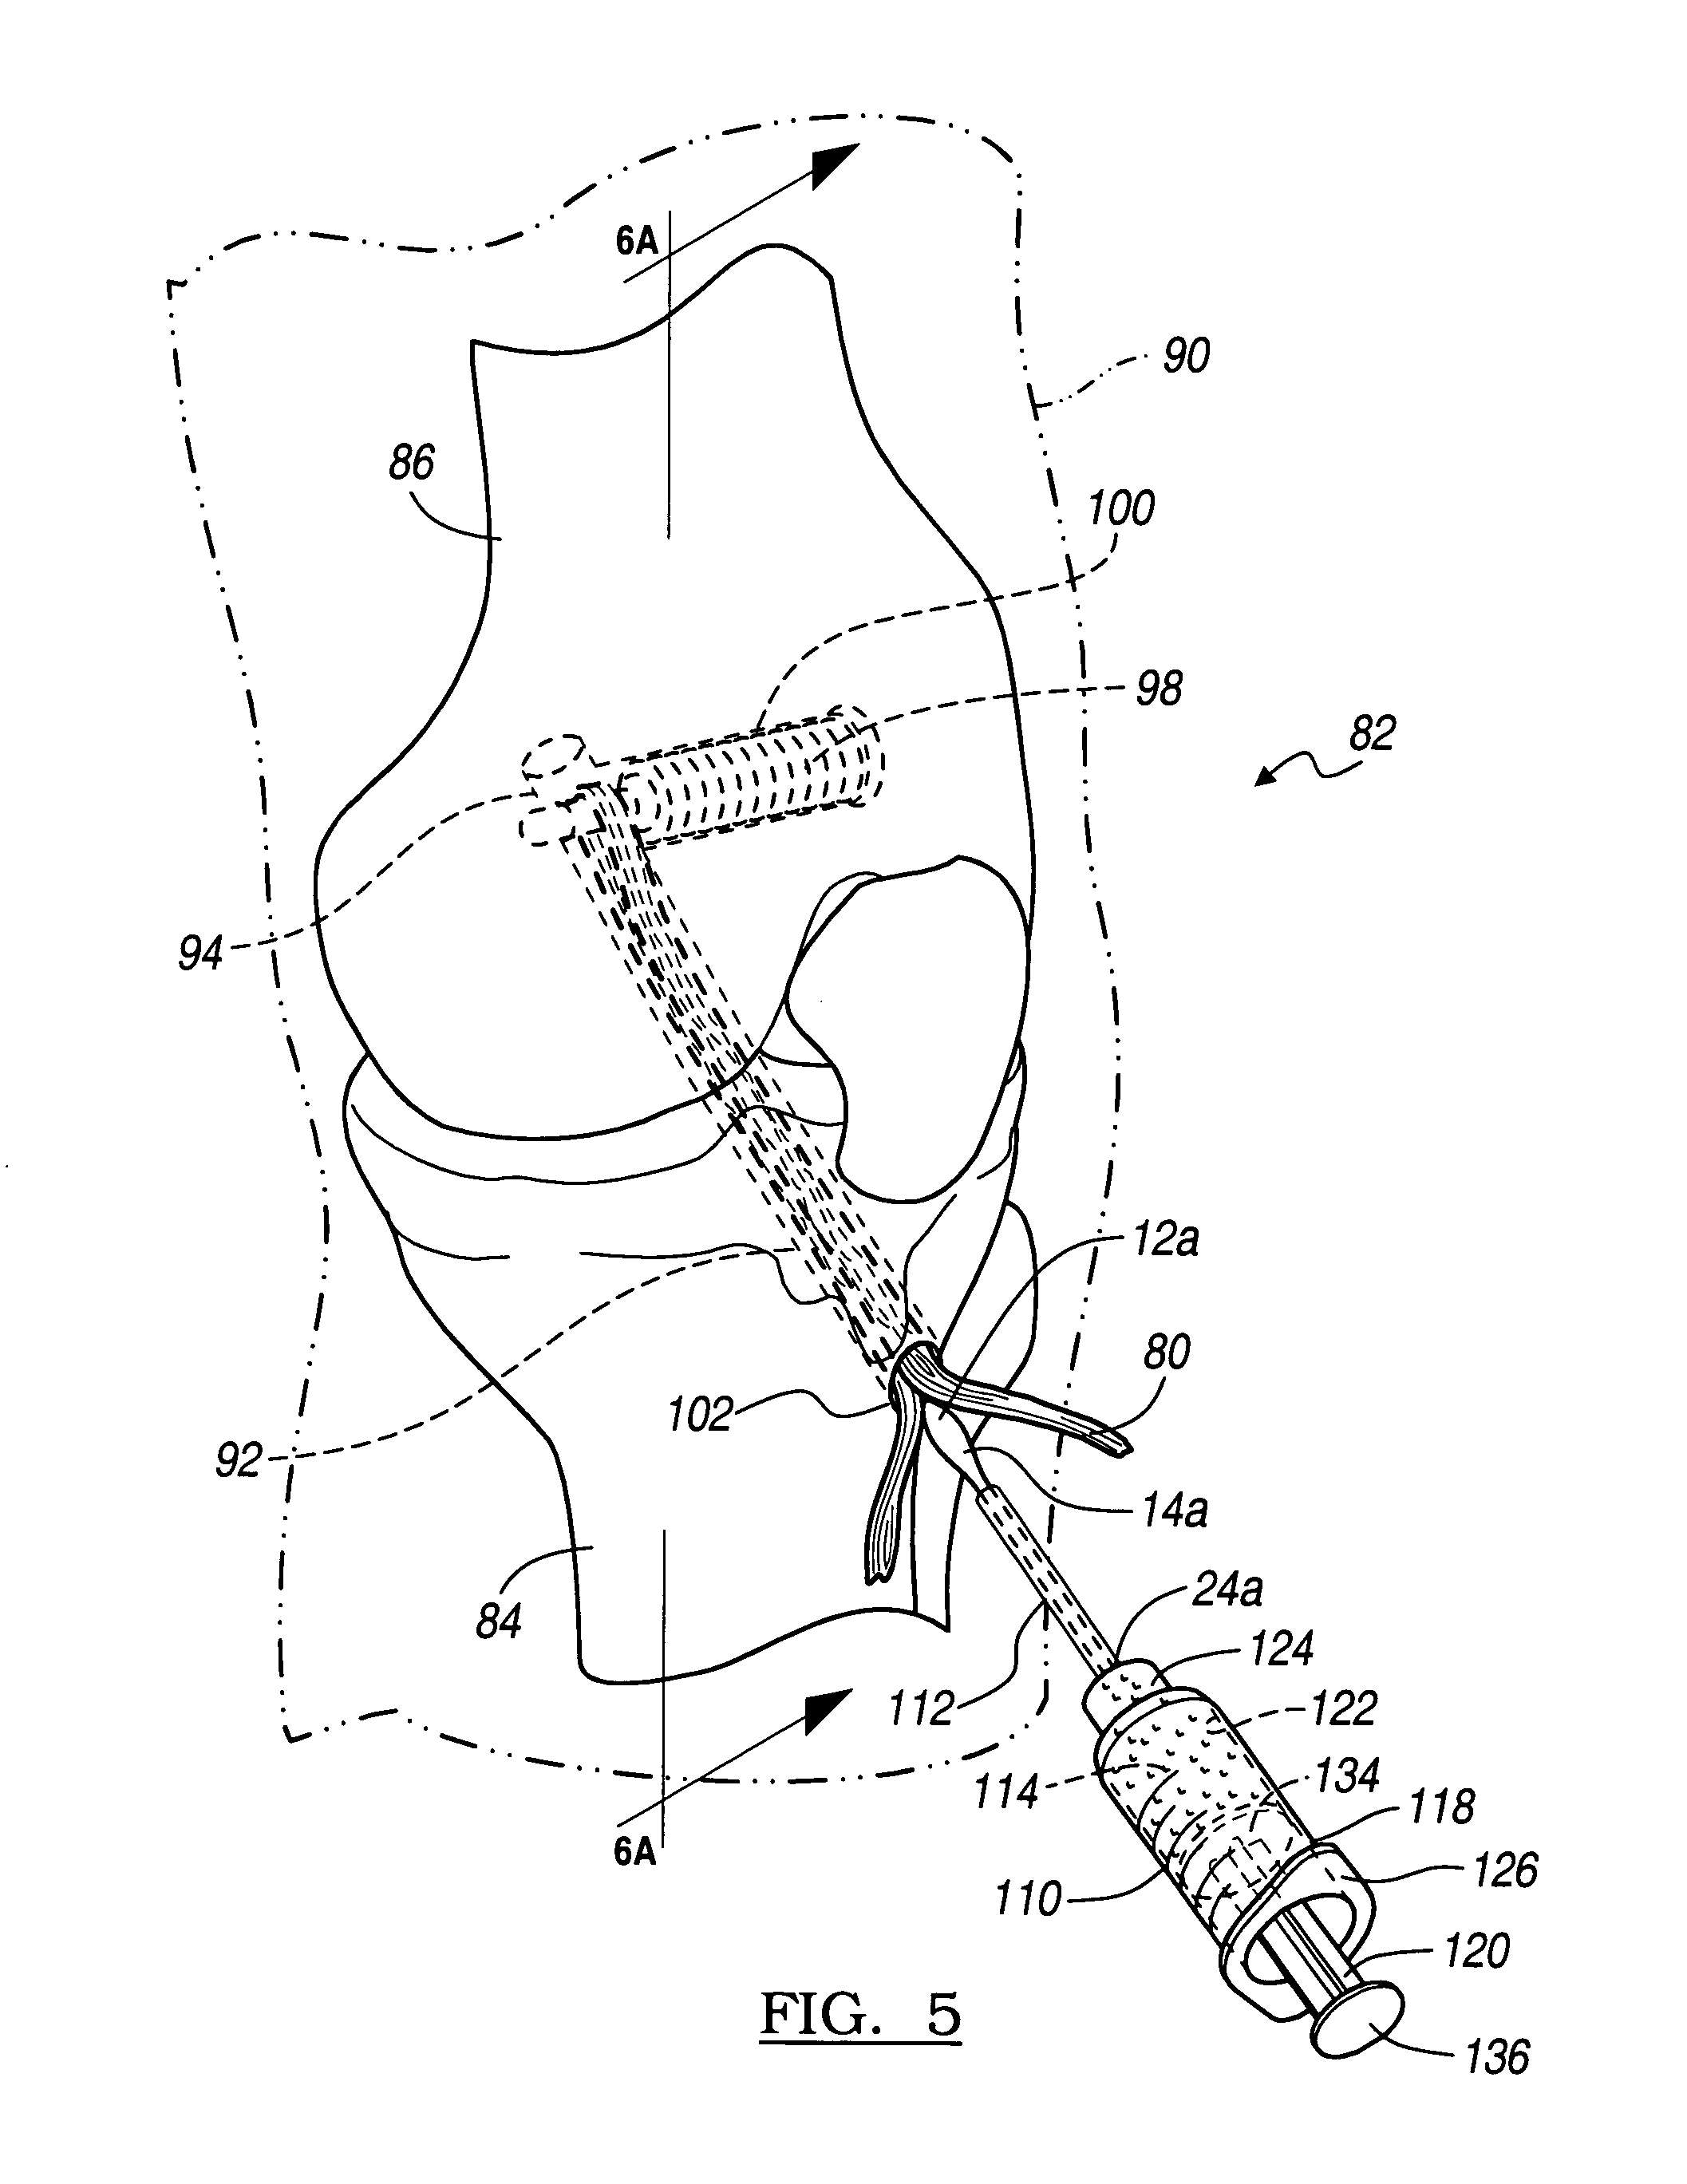 Method and apparatus for securing soft tissue to bone